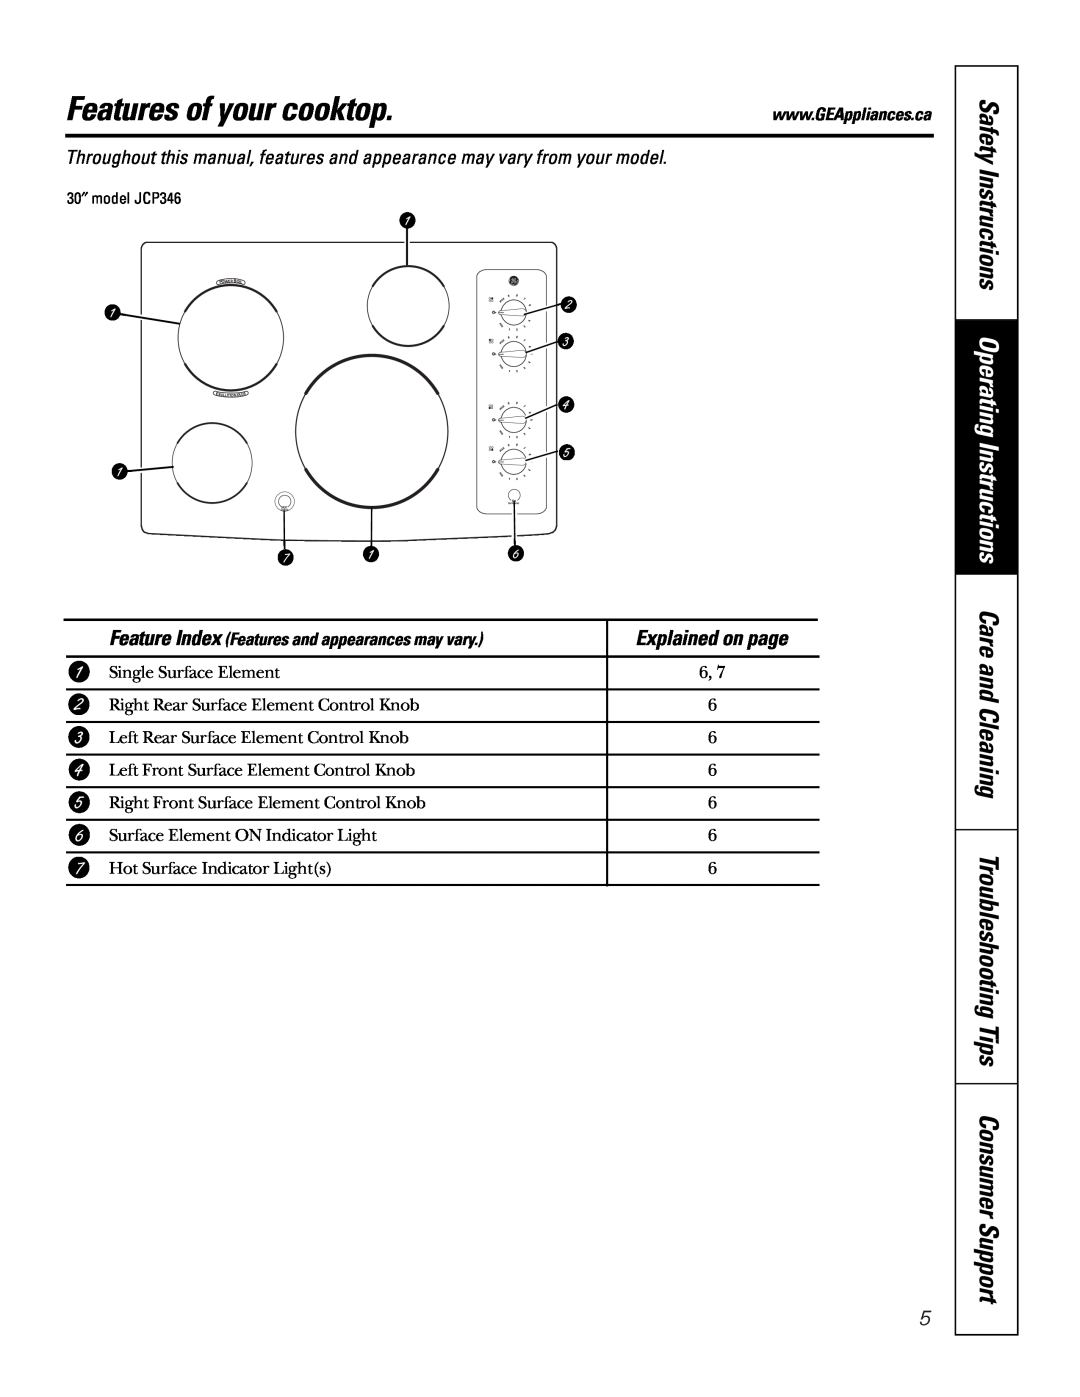 Mabe Canada JCP346 owner manual Features of your cooktop, Explained on page 